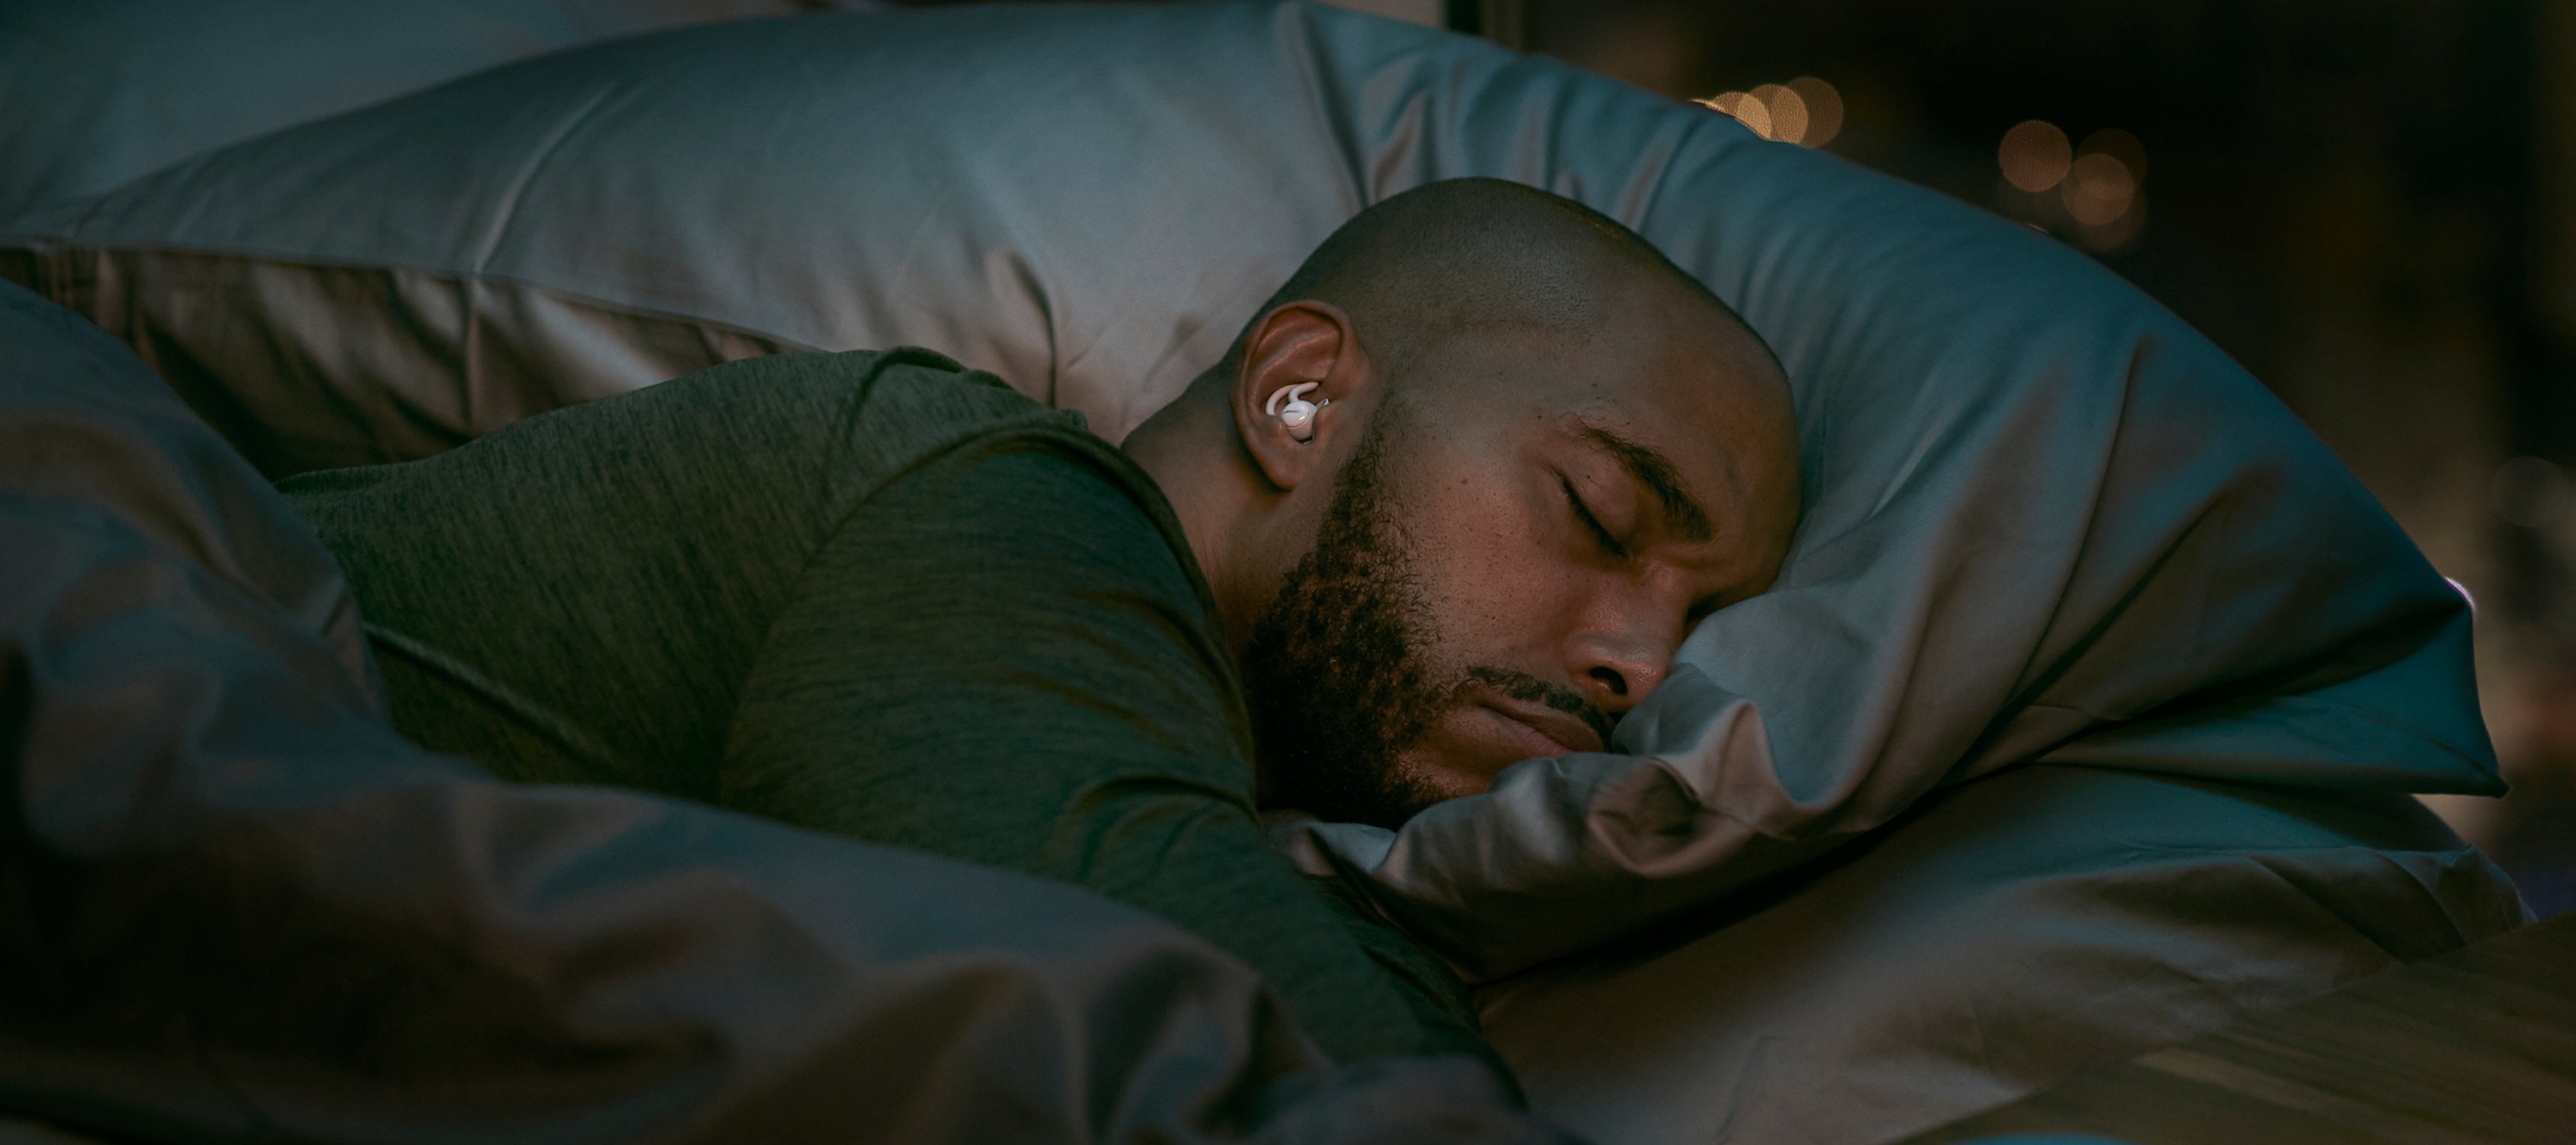 Bose: Connecting The Sleepbuds With The Consumers That Needed Them Most